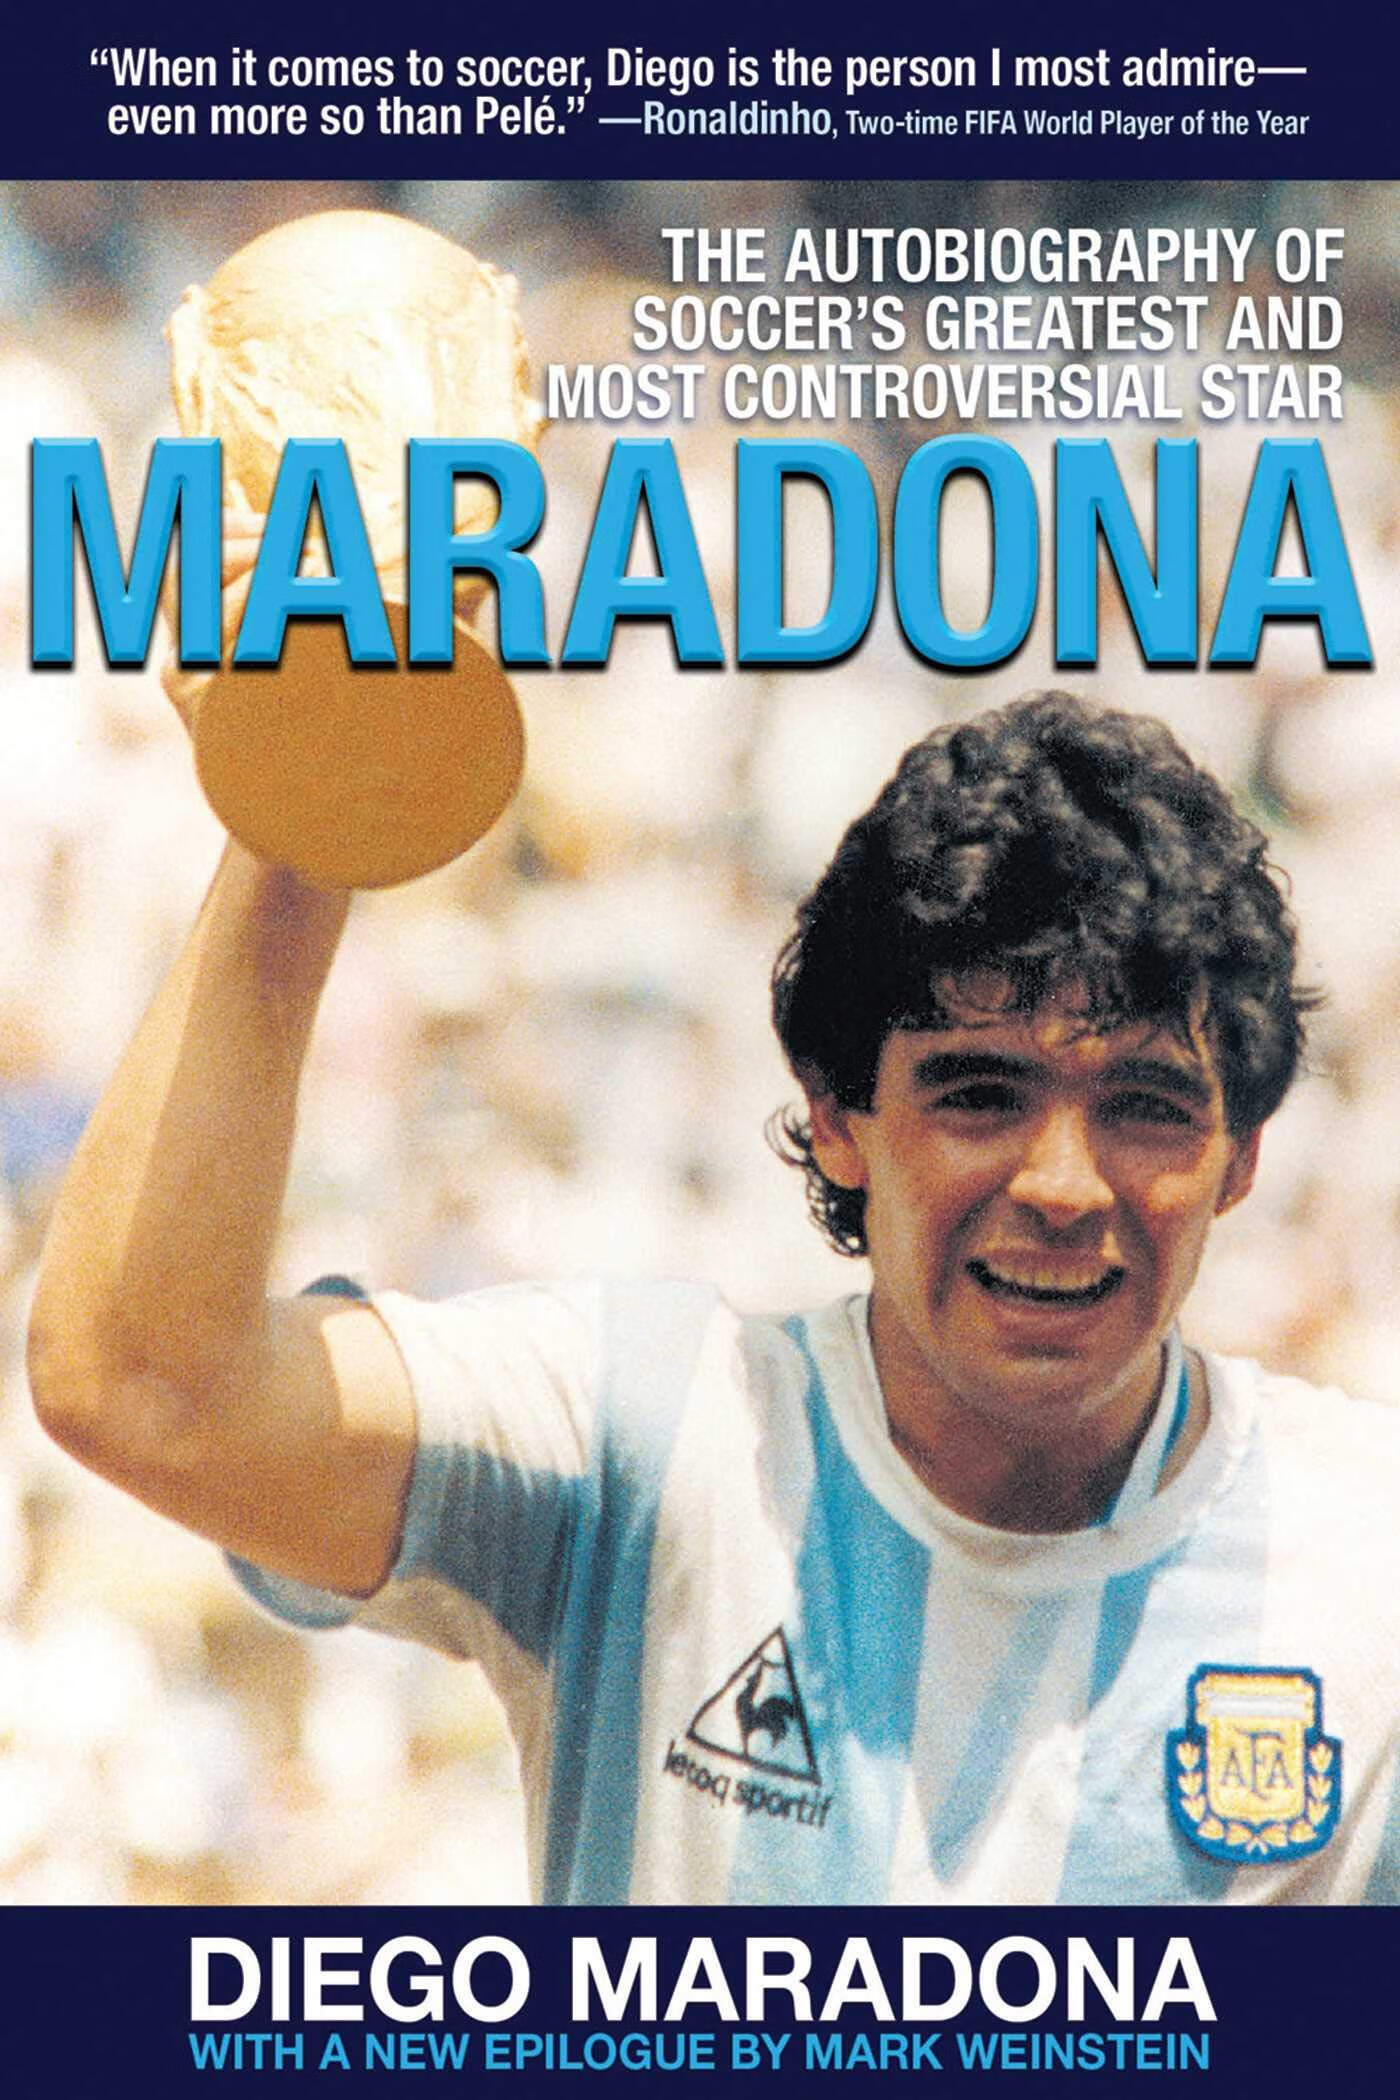 Maradona: The Autobiography of Soccer's Greatest and Most Controversial Star  马拉多纳 英文原版高性价比高么？